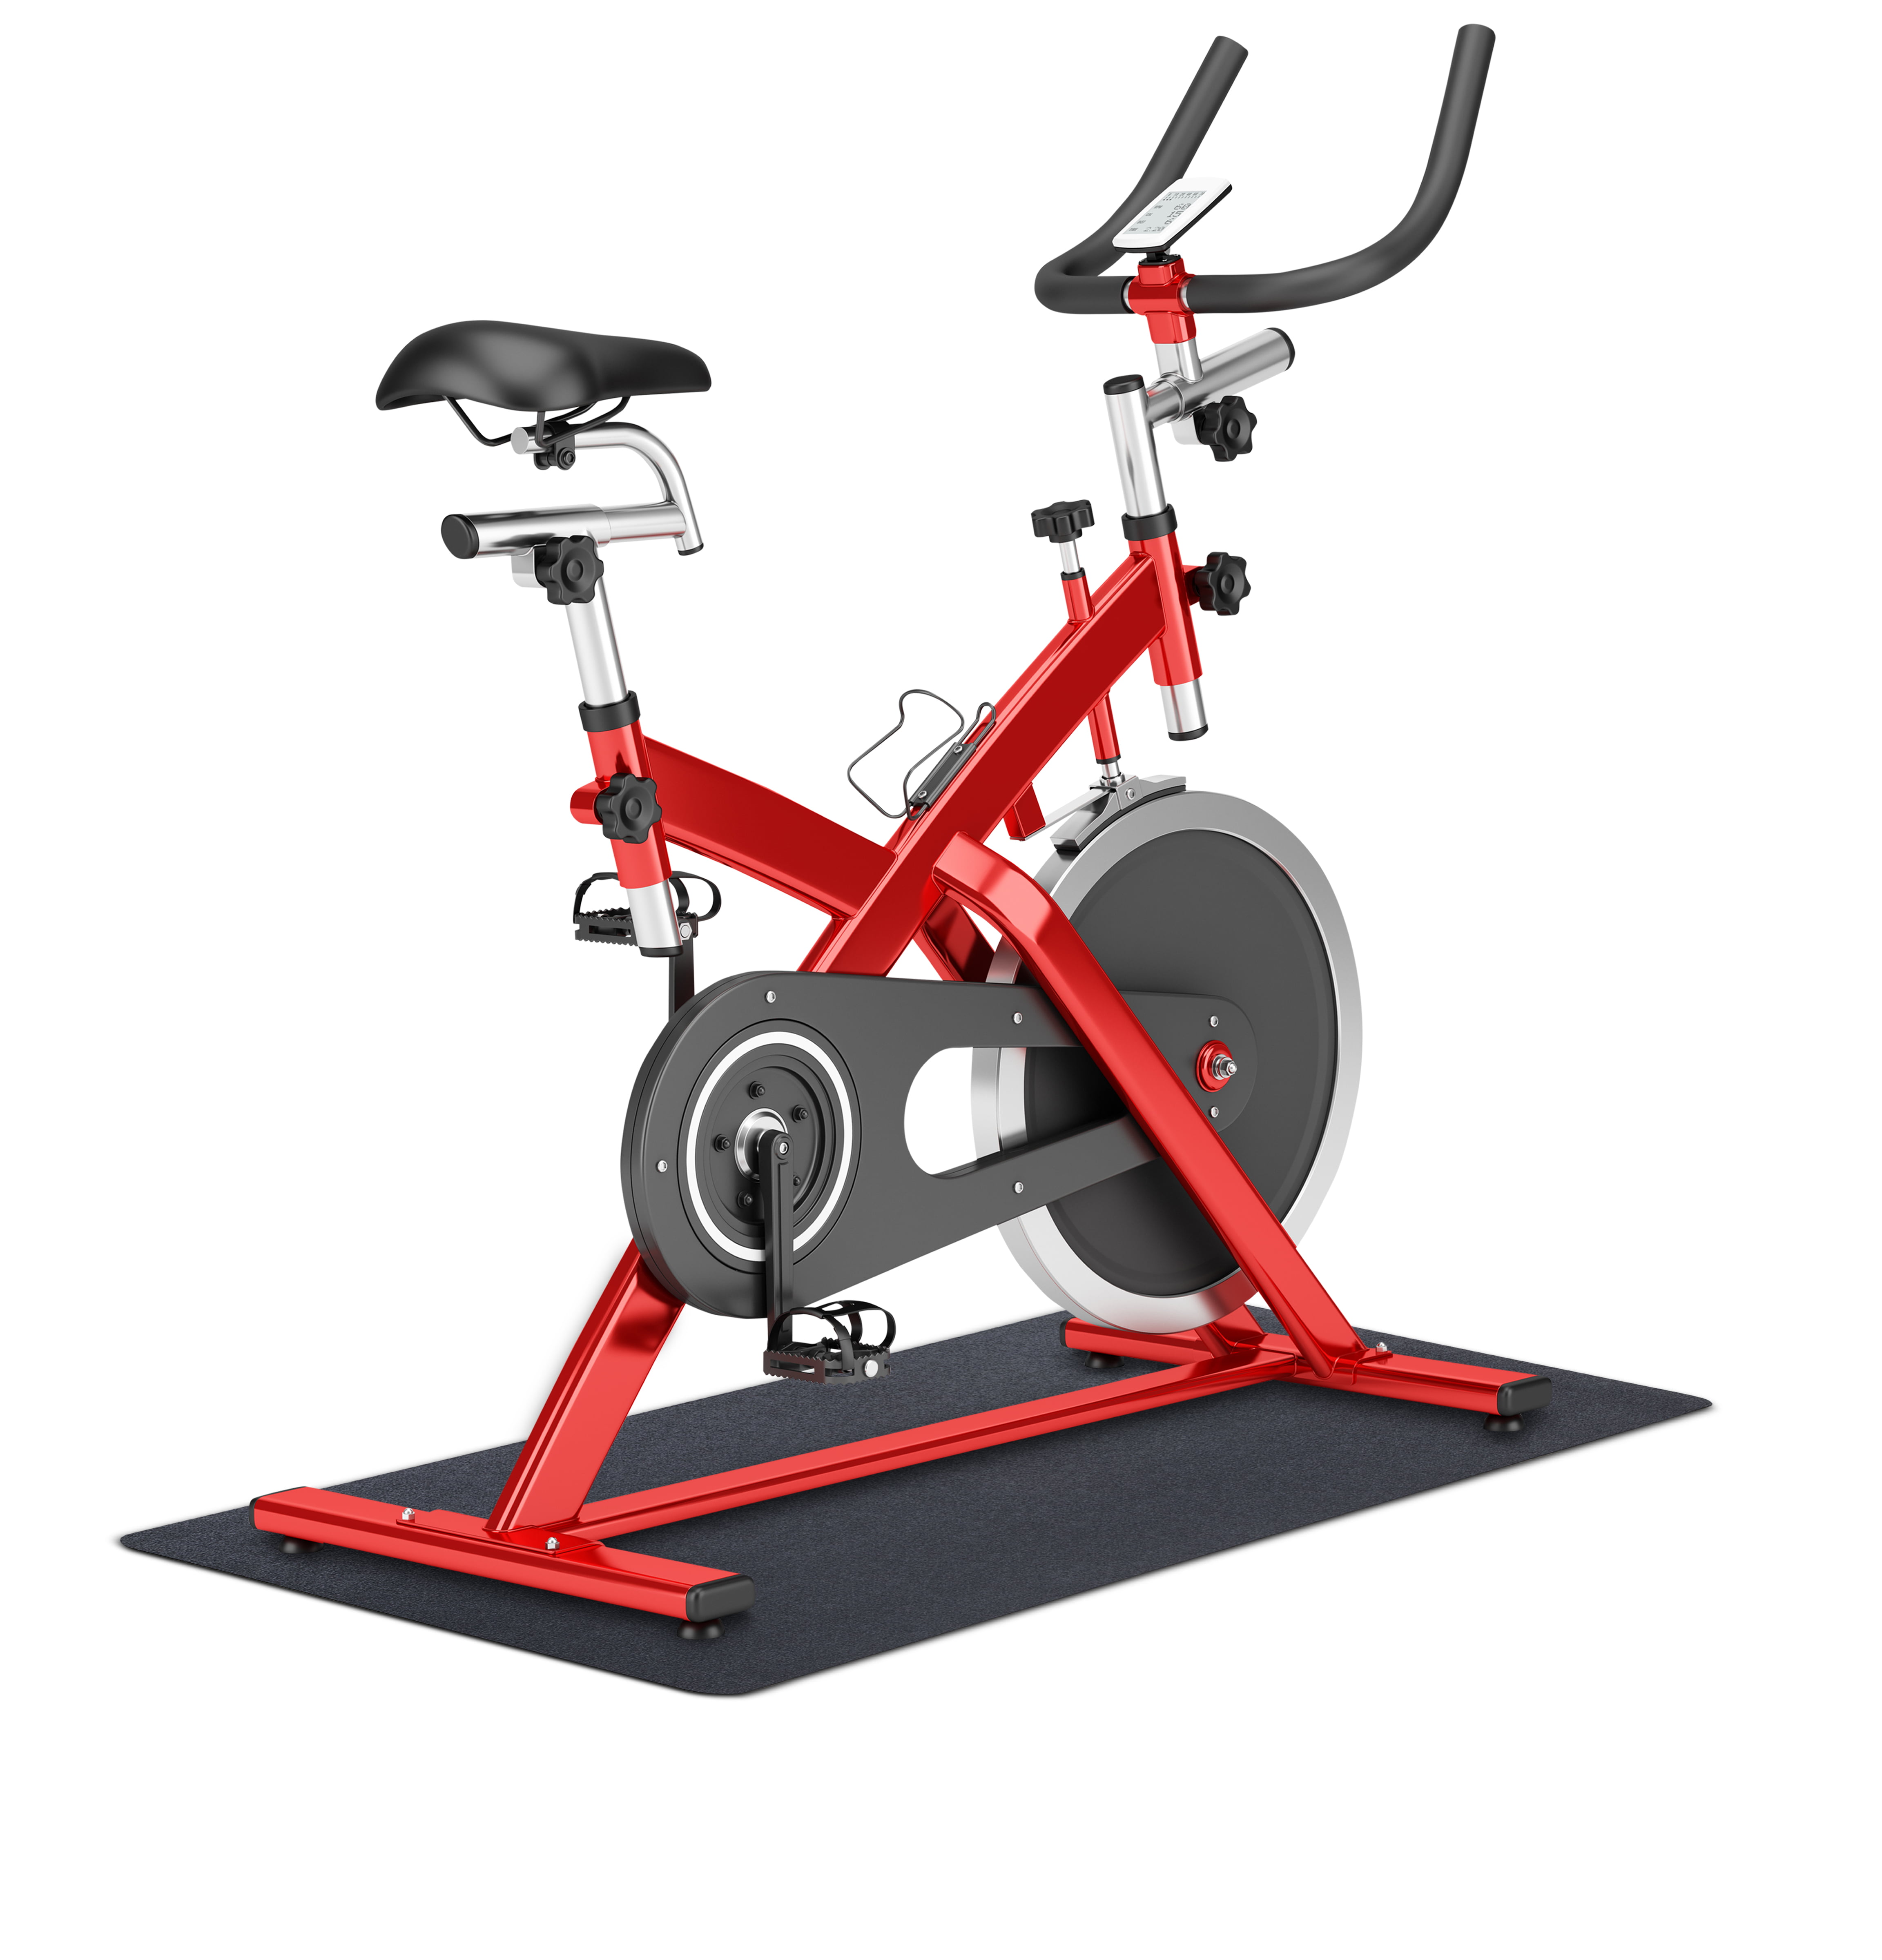 MotionTex  Stationary Bike Excersise Equipment Mat 24 x 48 inches 